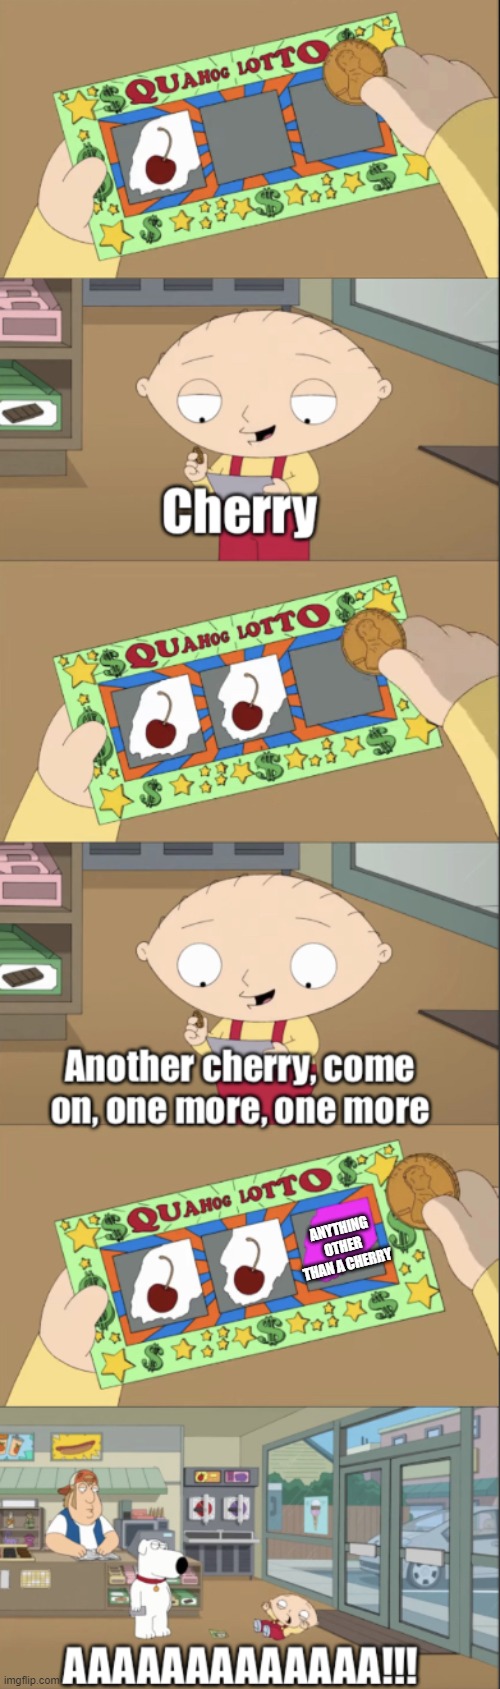 Stewie scratch card | ANYTHING OTHER THAN A CHERRY | image tagged in stewie scratch card | made w/ Imgflip meme maker